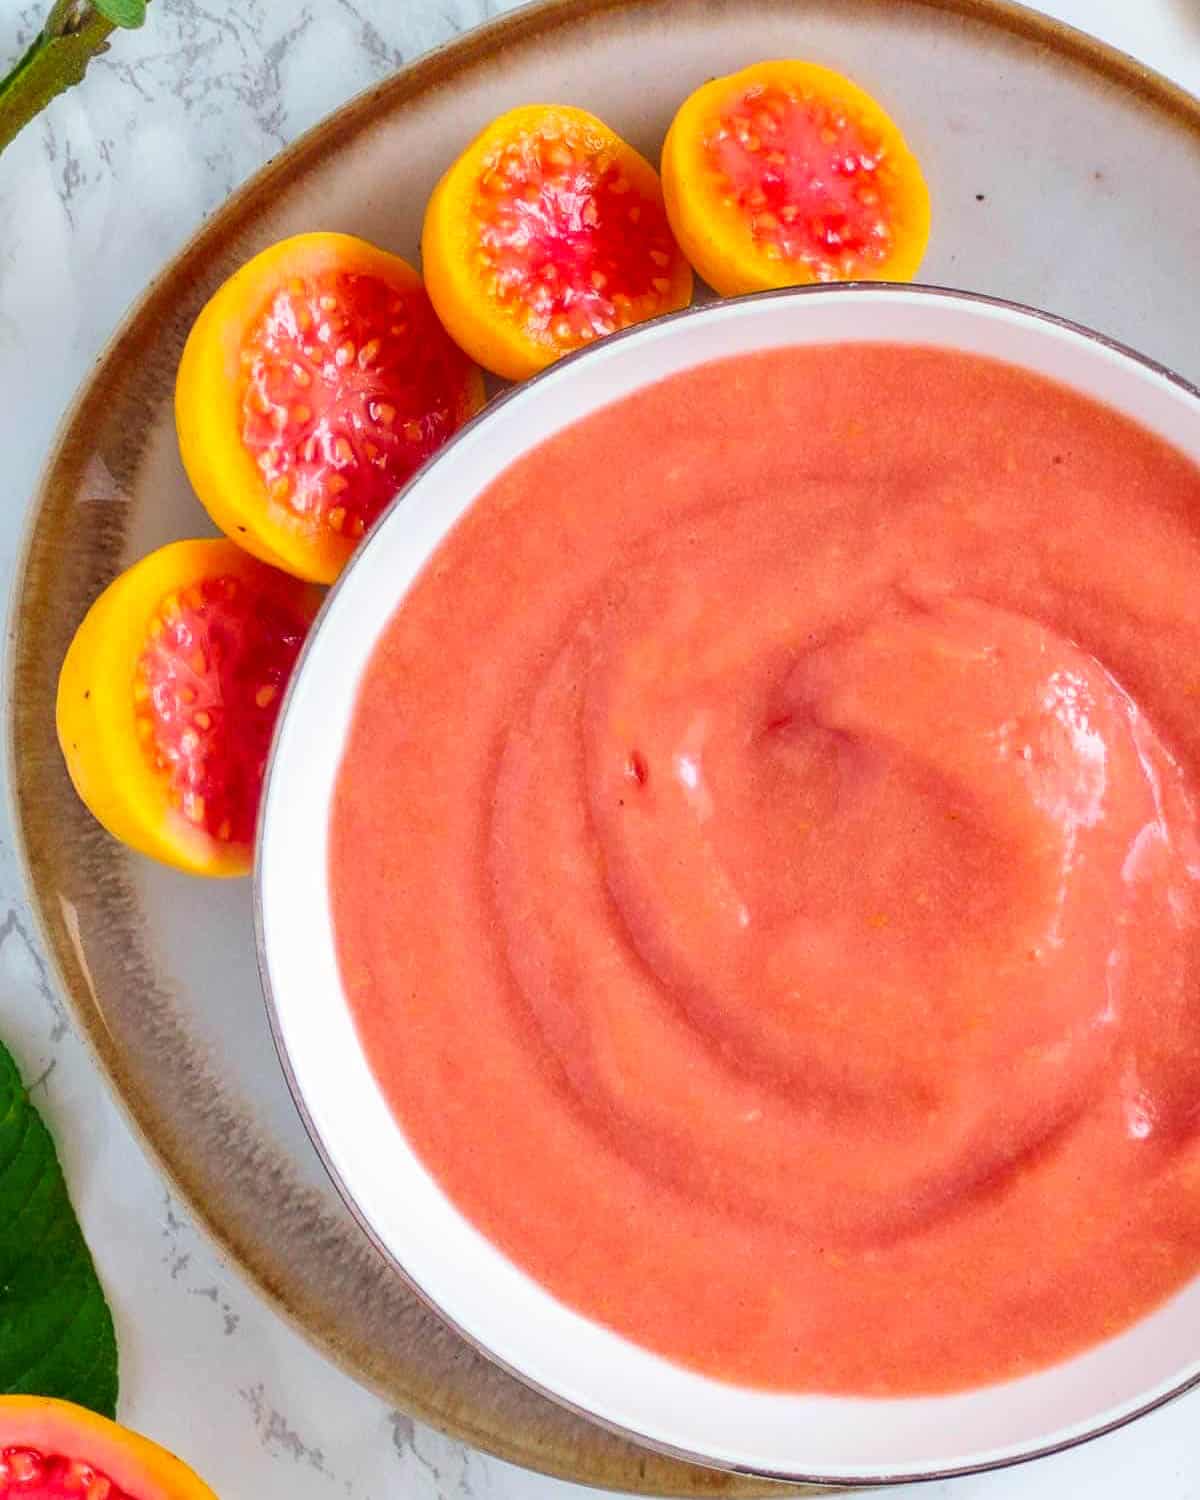 Finished bowl of pink guava puree is recipe ready.